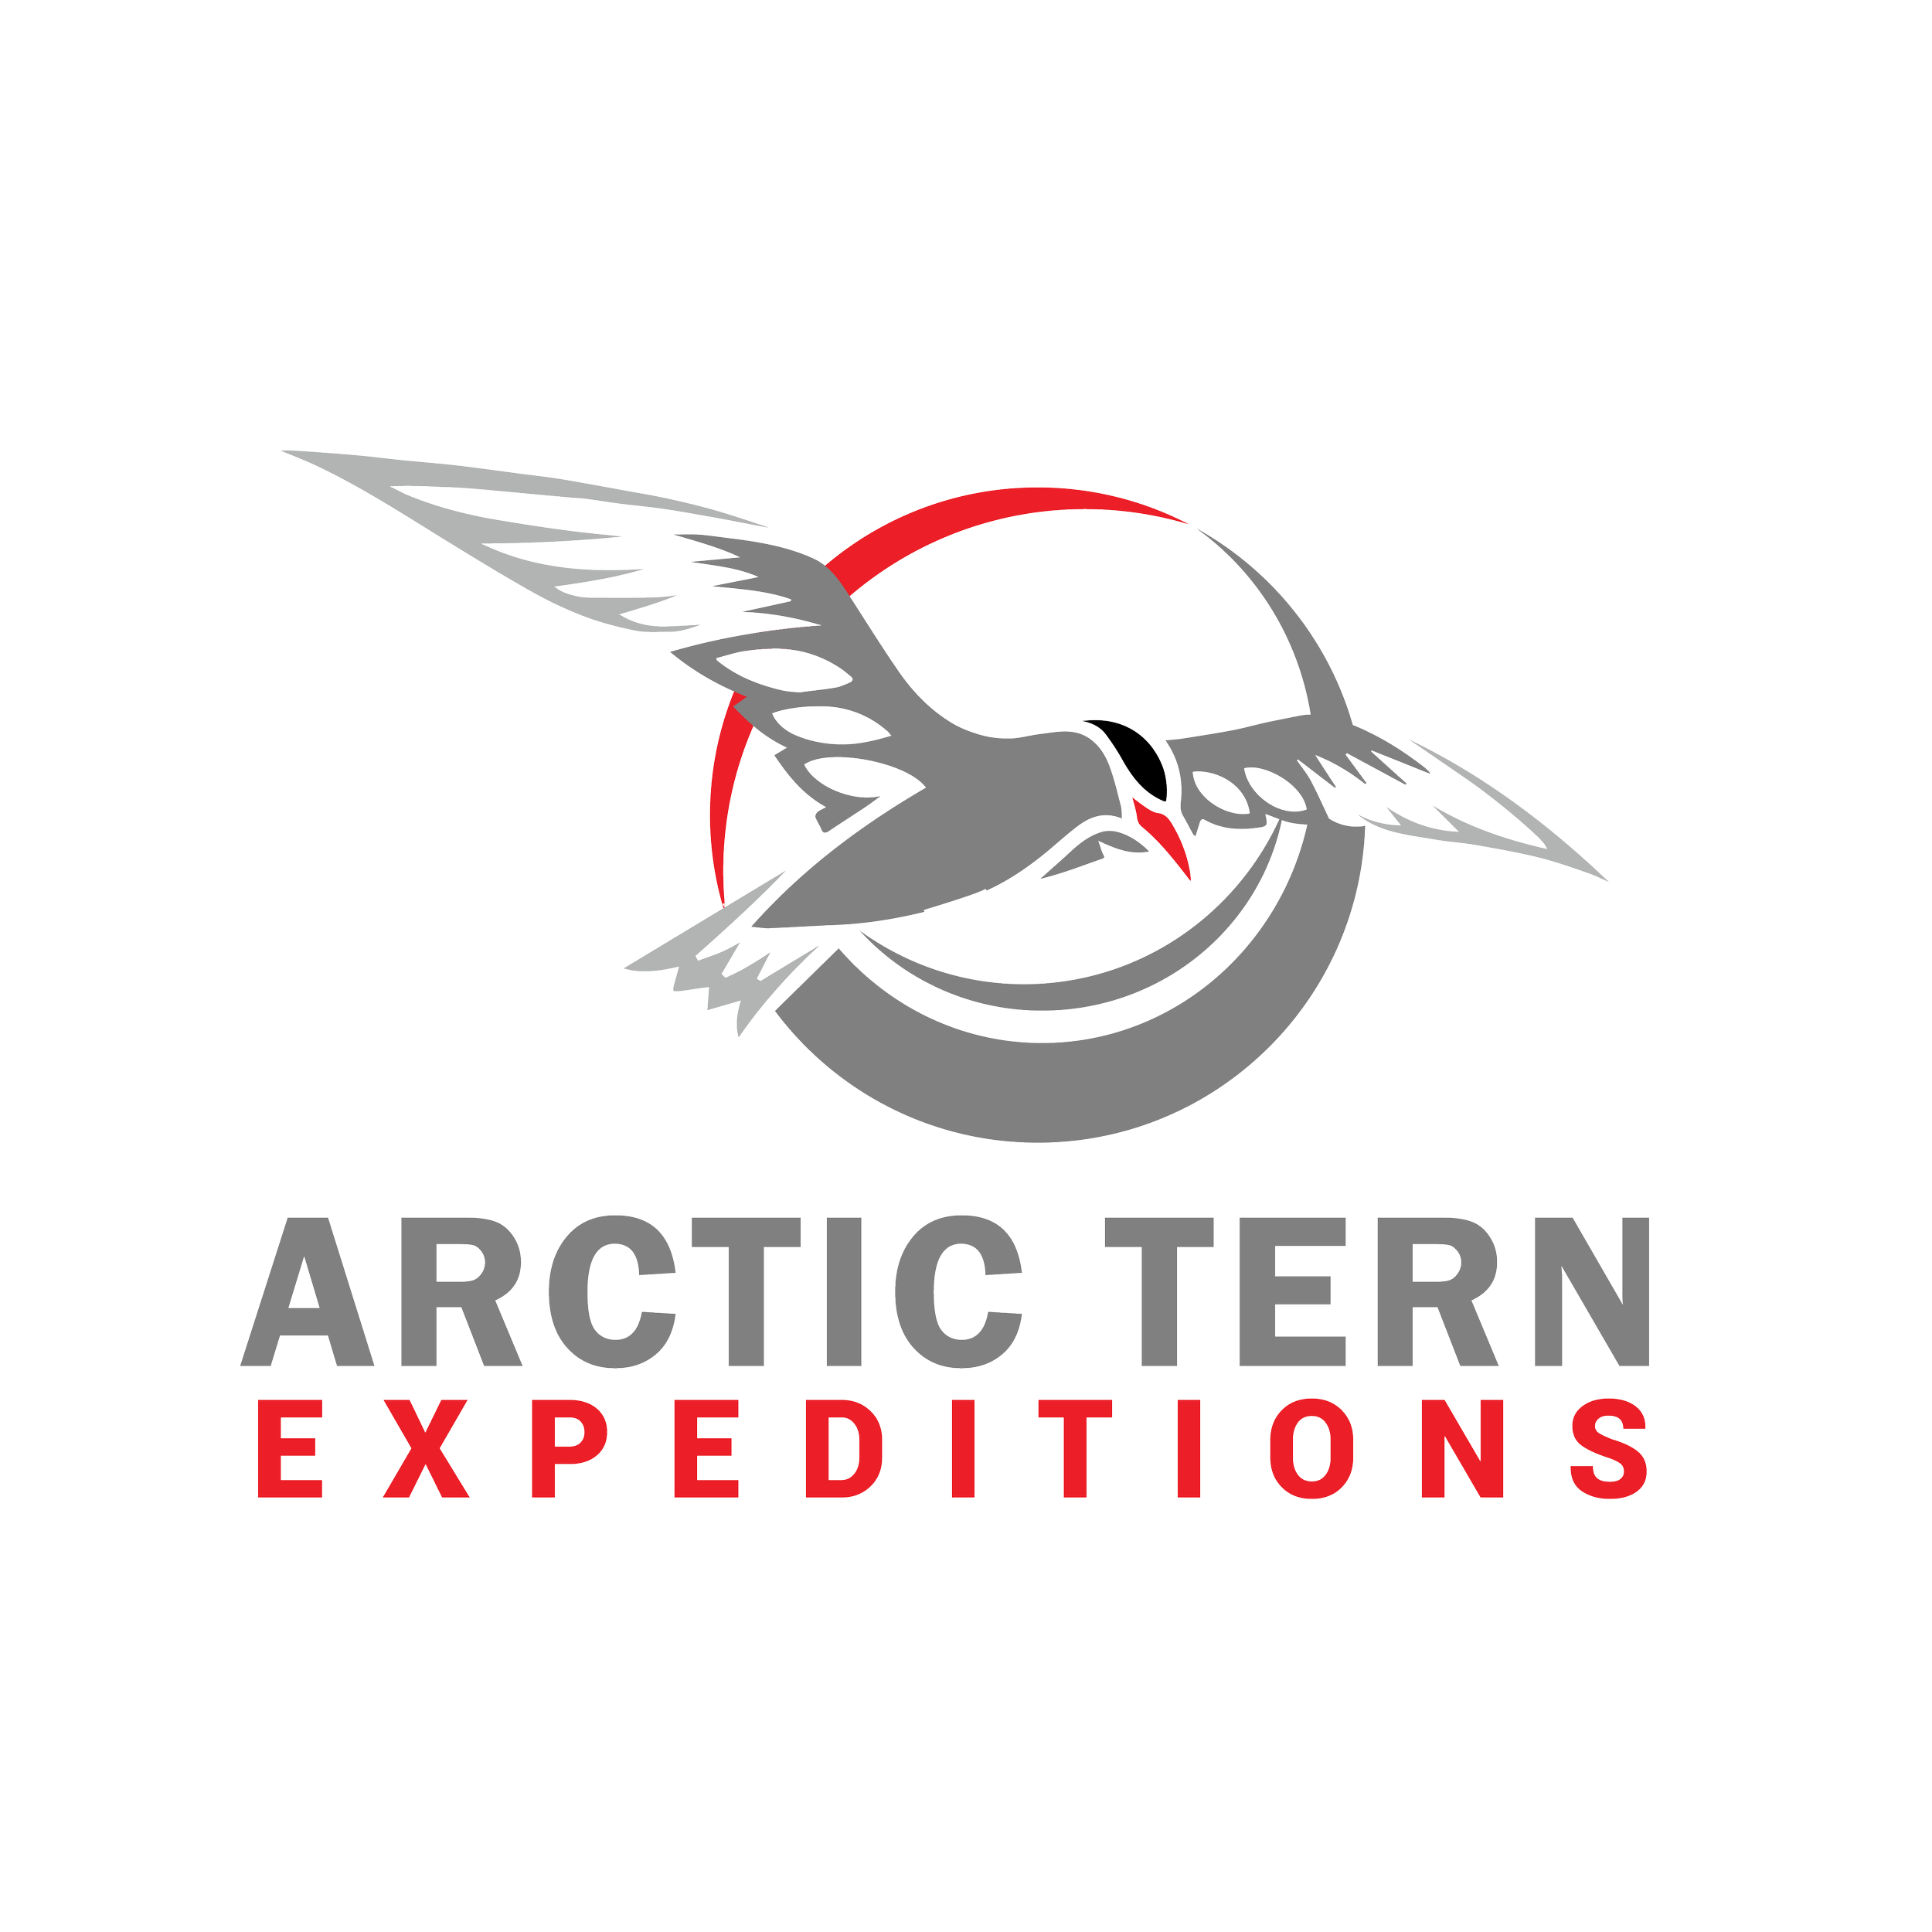 Arctic Tern Expeditions